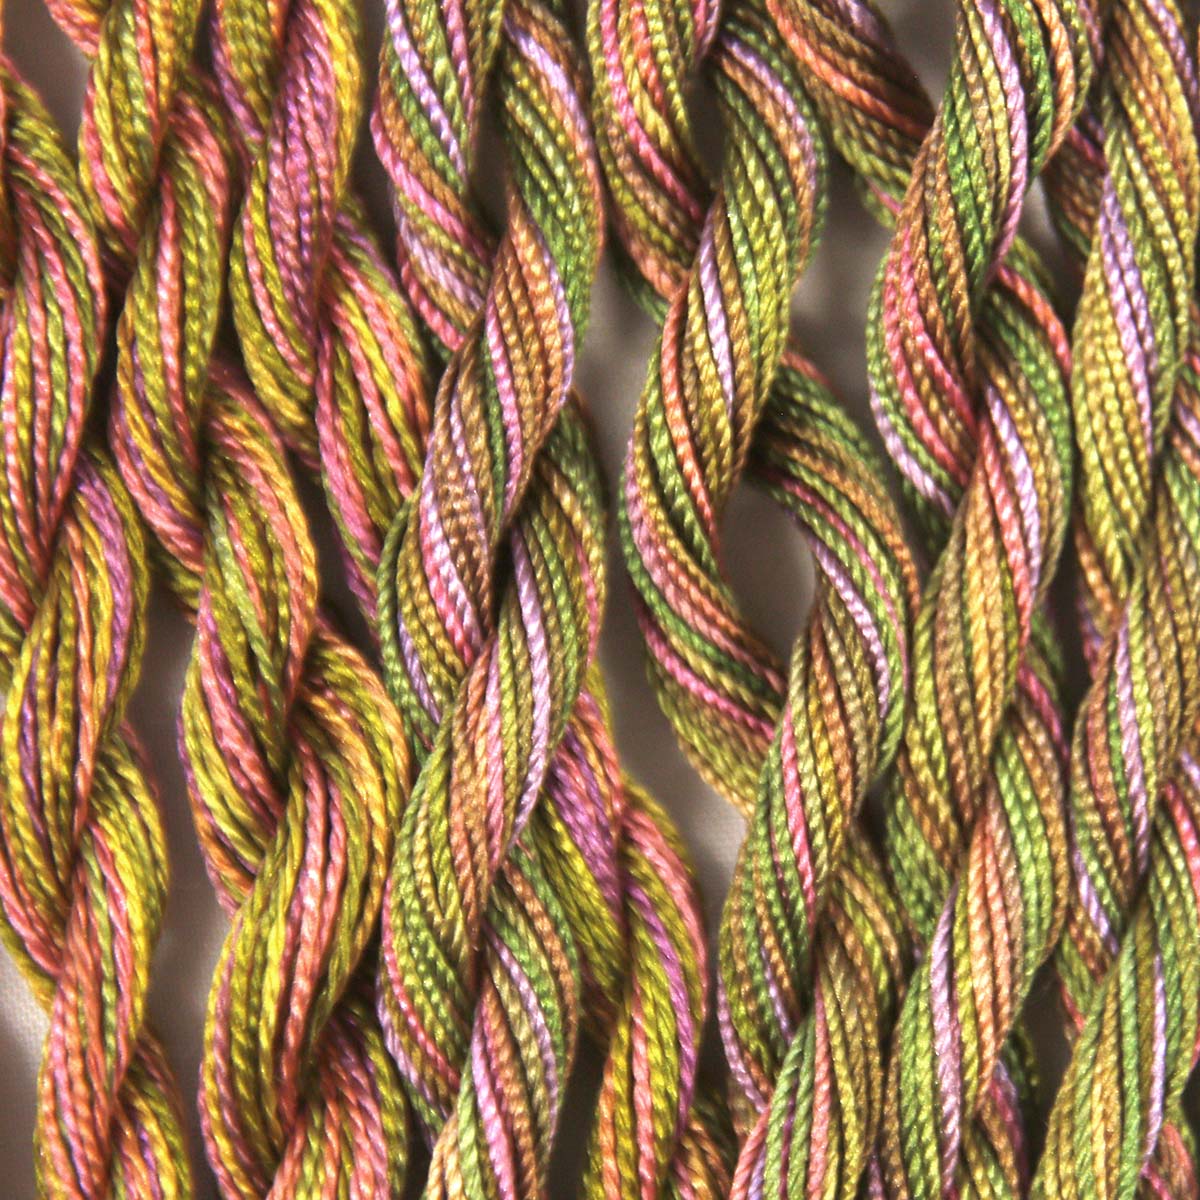 www.colourstreams.com.au Colour Streams Hand Dyed Silk Threads Silken Strands Ophir Exotic Lights Aurora Slow Stitch Embroidery Textile Arts Fibre DL 31 Purples Pinks Olives Greens Gold 